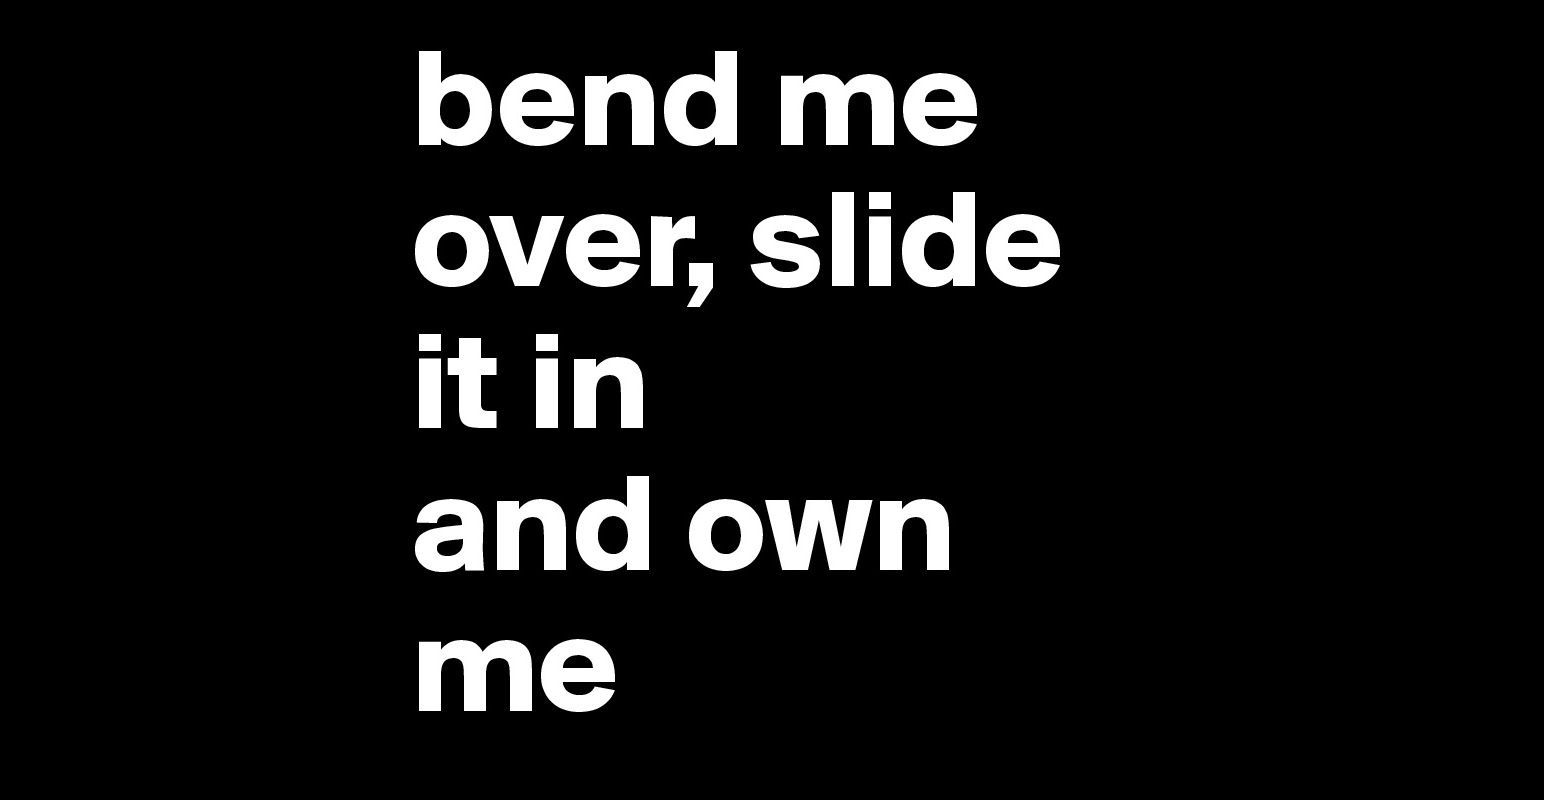 Bend Me Over Slide It In And Own Me Post By Bealindmark On Boldomatic 6358